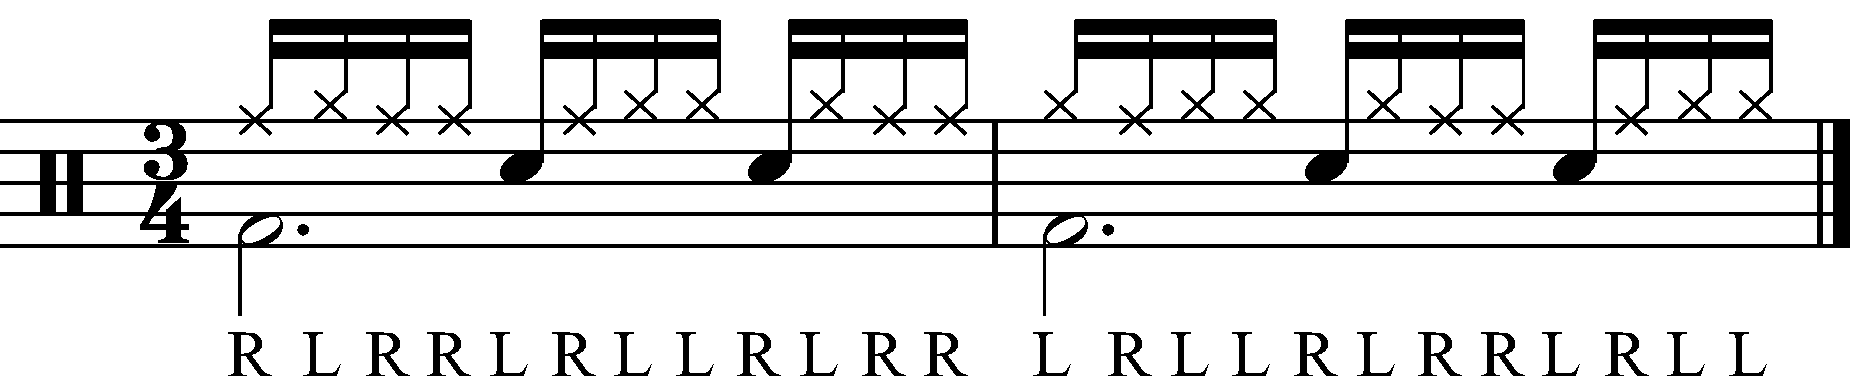 A 3/4 waltz paradiddle groove